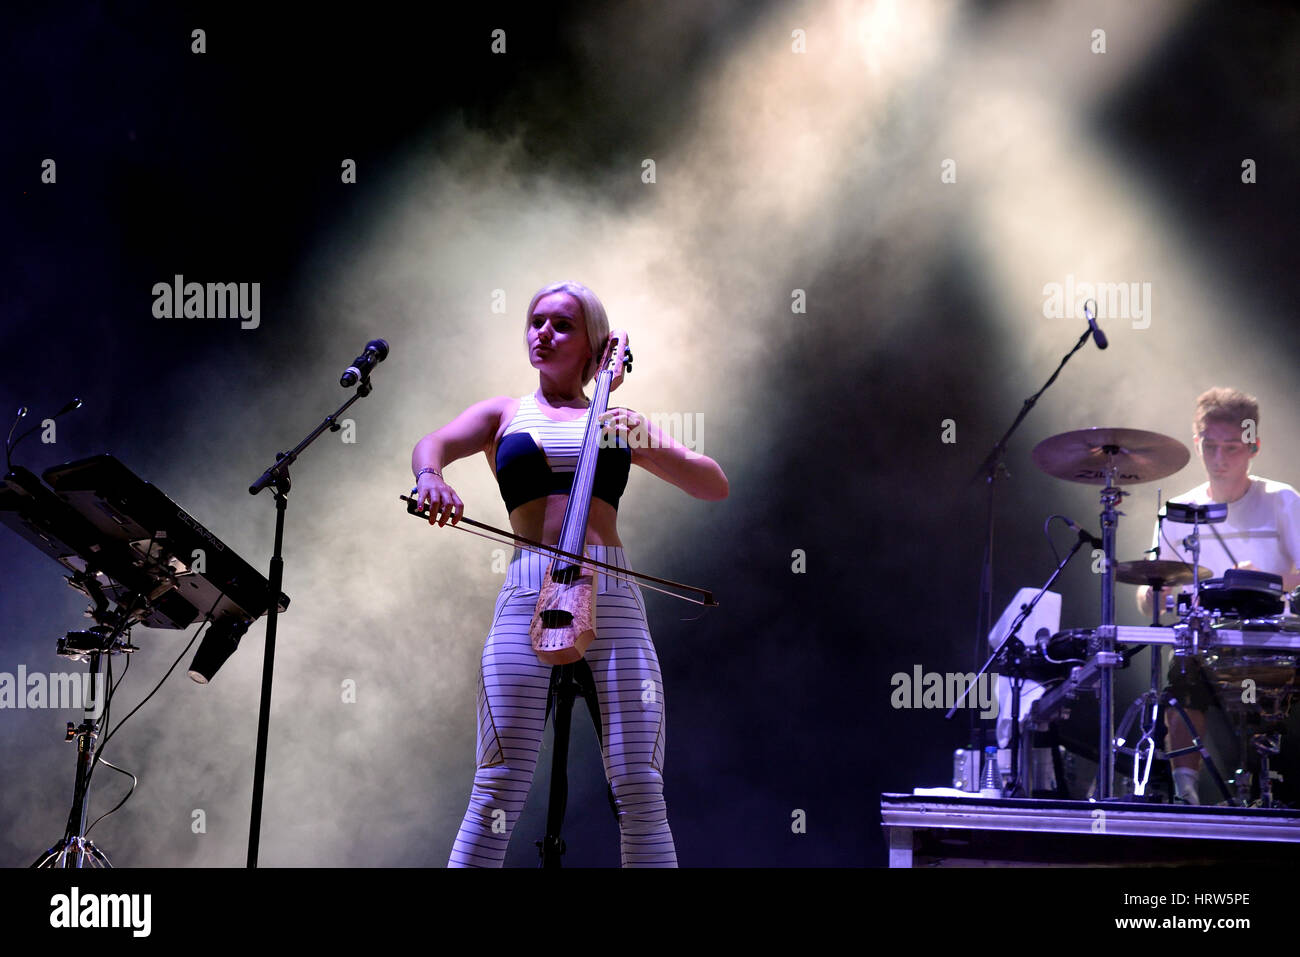 BENICASSIM, SPAIN - JUL 16: Clean Bandit (electronic pop group) in concert at FIB Festival on July 16, 2015 in Benicassim, Spain. Stock Photo